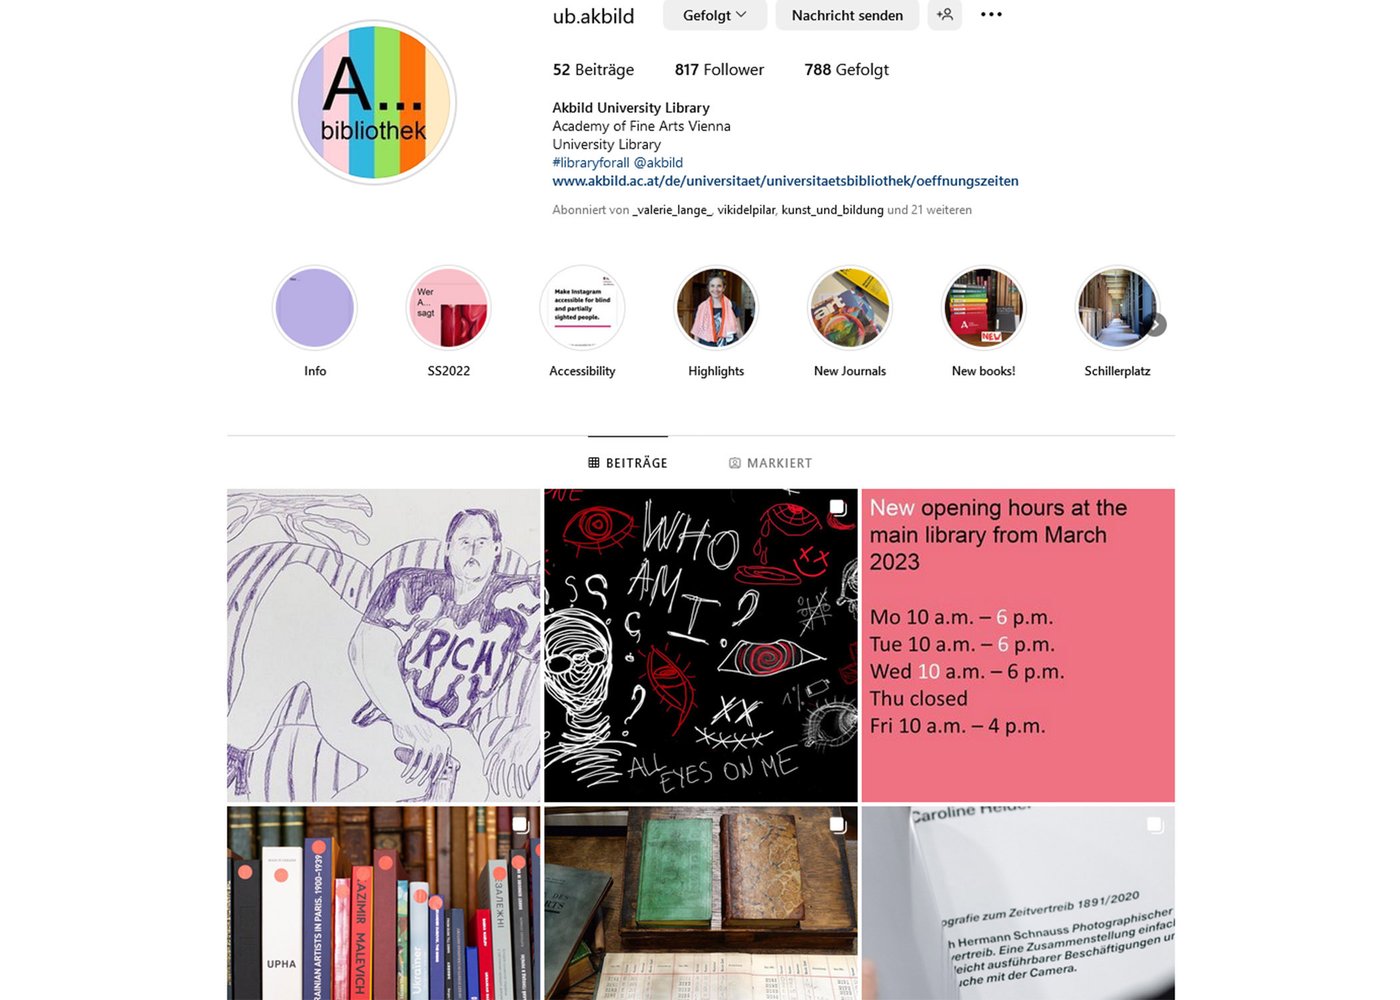 View of the Instagram page of the University Library of the Academy of Fine Arts Vienna with the sections Info, SS2022, Accessibility, Highlights, New Journals, New books!, Schillerplatz as well as the images for some of the contributions.